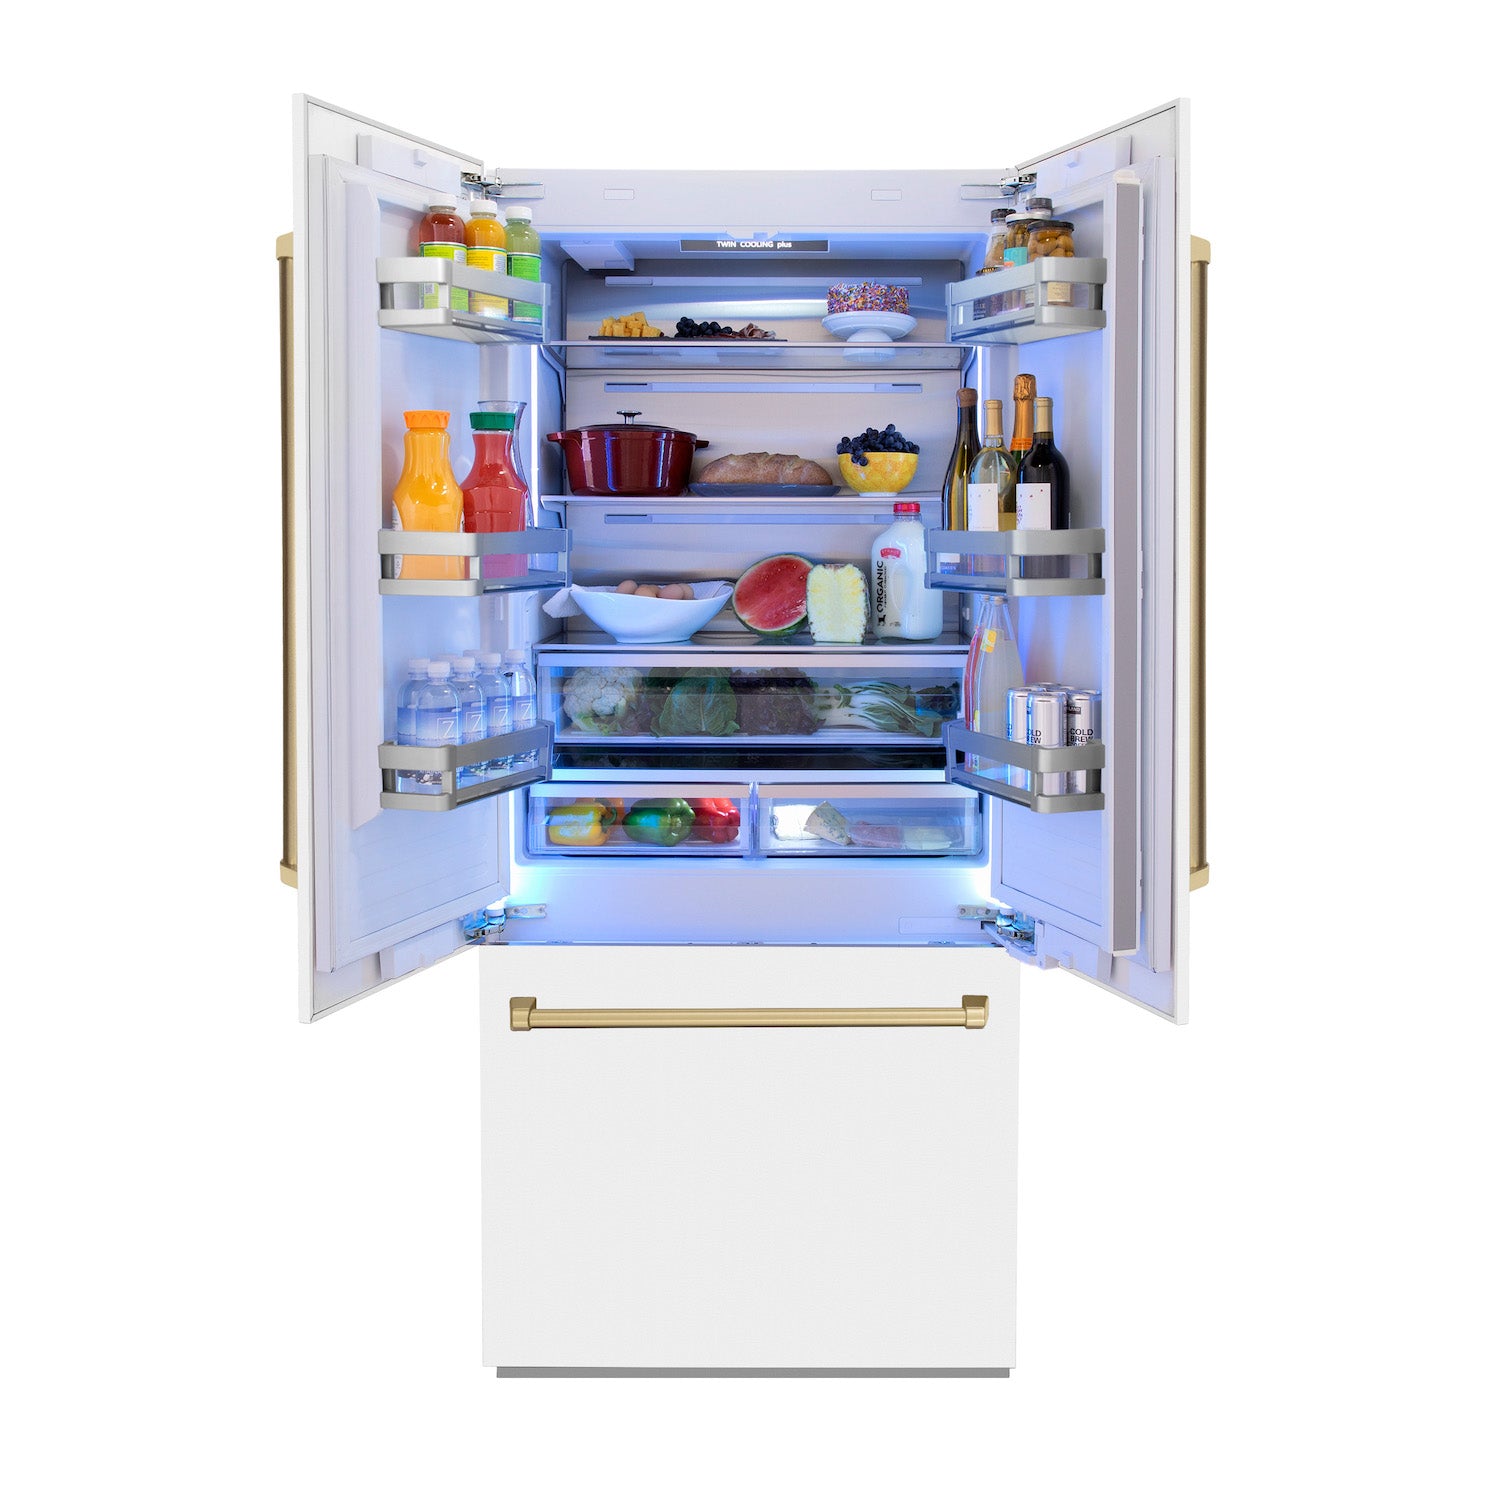 ZLINE Autograph Edition 36 in. 19.6 cu. ft. Built-in 2-Door Bottom Freezer Refrigerator with Internal Water and Ice Dispenser in White Matte with Champagne Bronze Accents (RBIVZ-WM-36-CB) front, open with food inside refrigeration compartment.